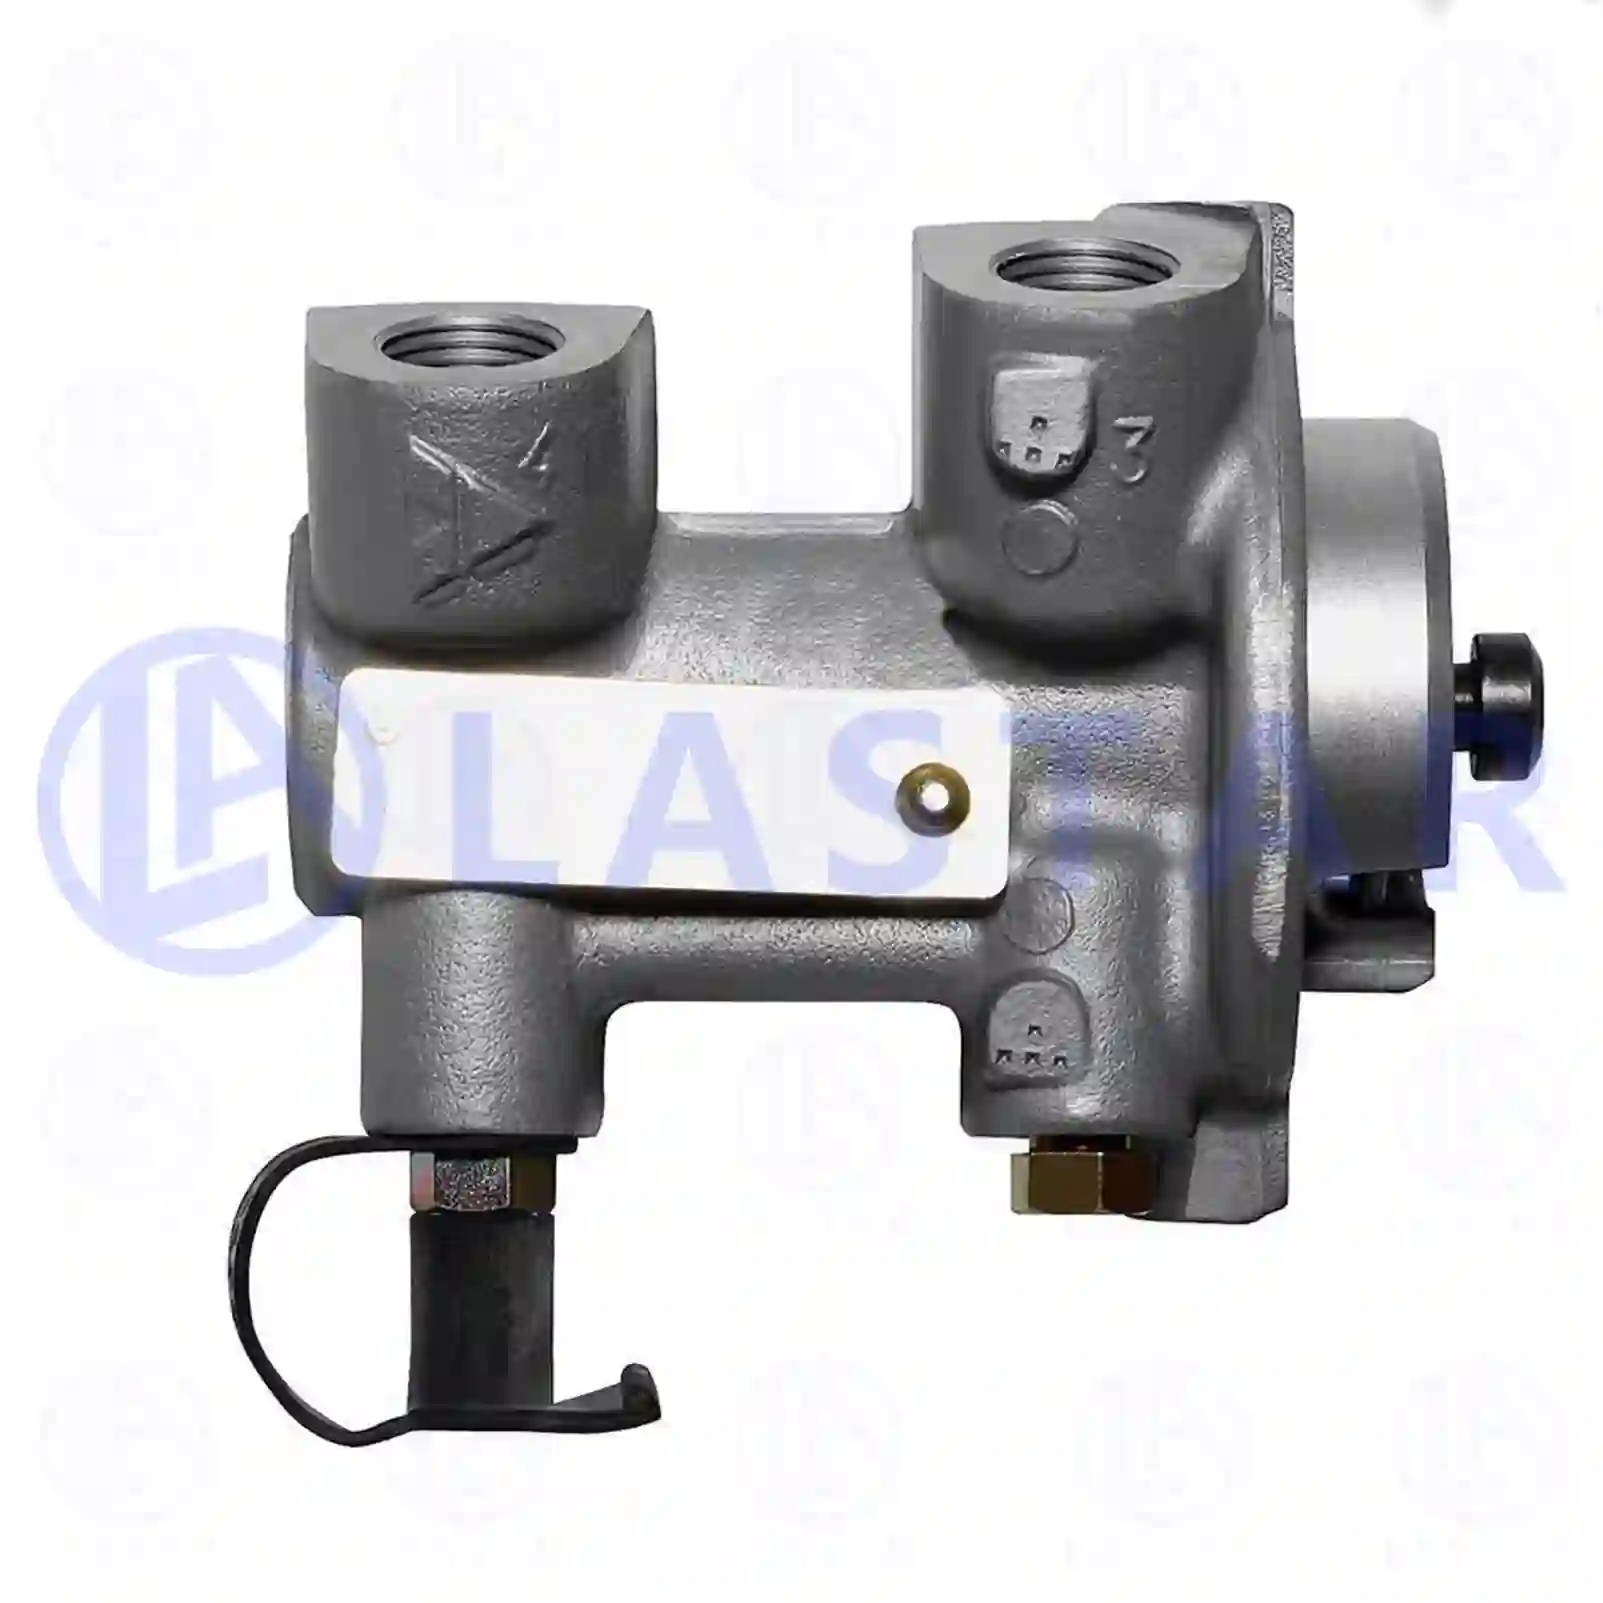 Shifting cylinder, 77732803, 0012602563, ZG30601-0008 ||  77732803 Lastar Spare Part | Truck Spare Parts, Auotomotive Spare Parts Shifting cylinder, 77732803, 0012602563, ZG30601-0008 ||  77732803 Lastar Spare Part | Truck Spare Parts, Auotomotive Spare Parts